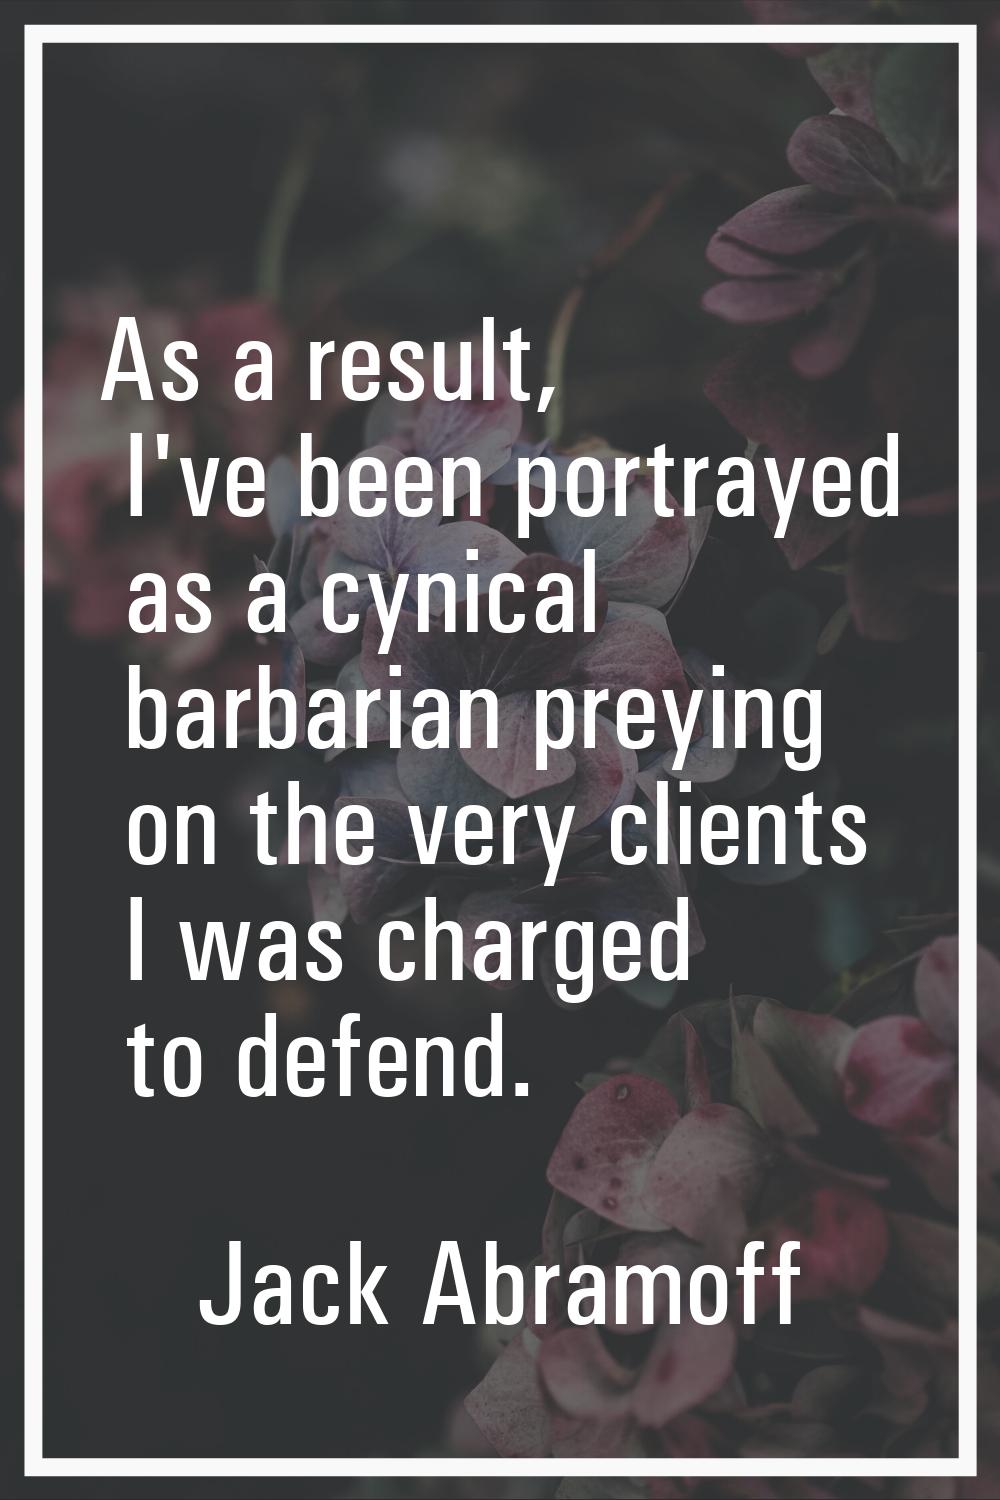 As a result, I've been portrayed as a cynical barbarian preying on the very clients I was charged t